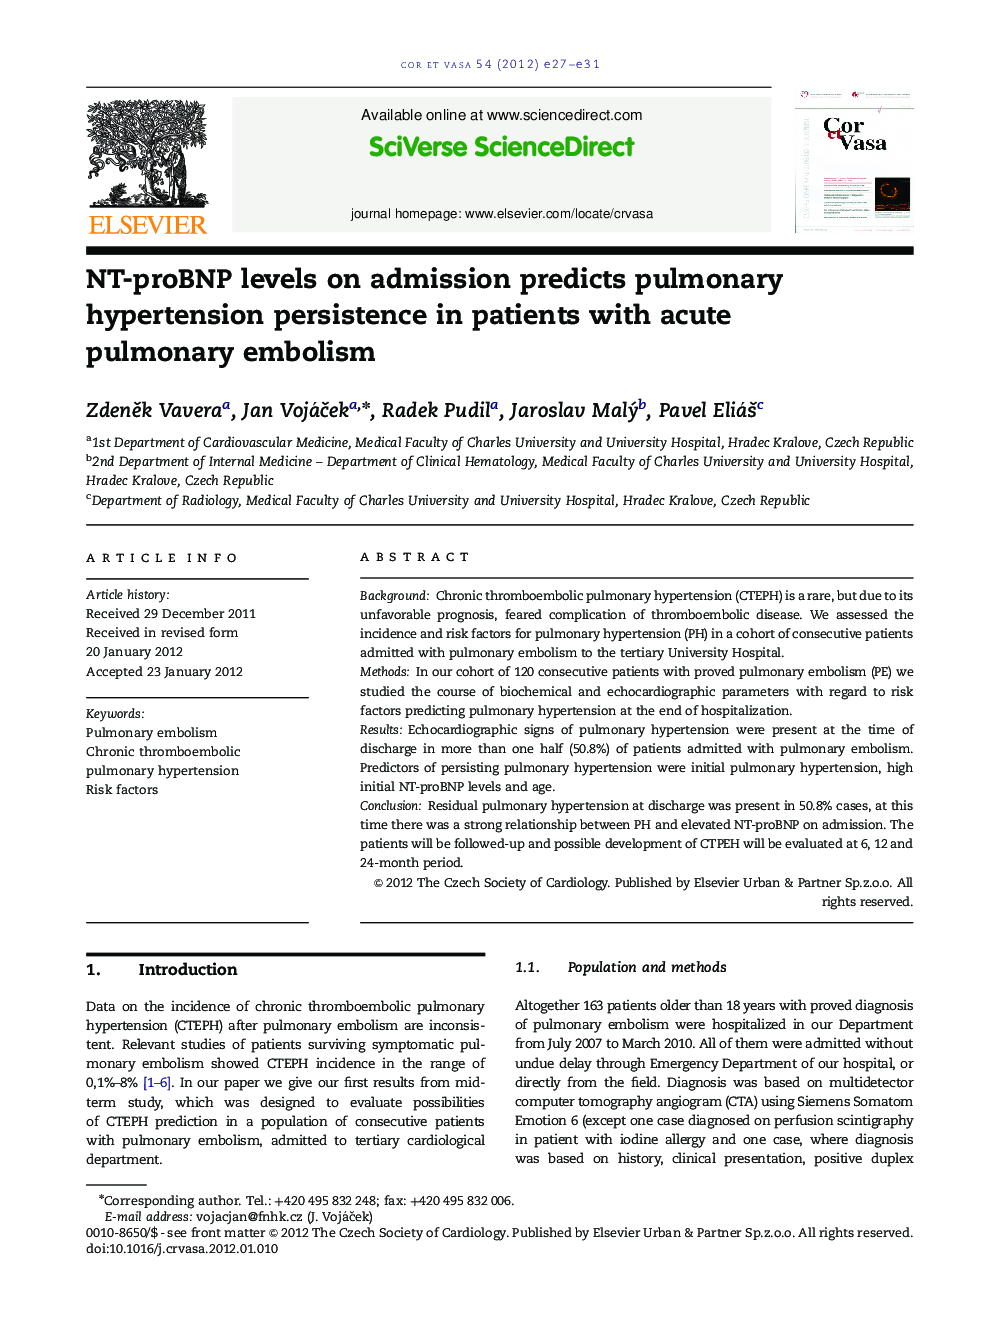 NT-proBNP levels on admission predicts pulmonary hypertension persistence in patients with acute pulmonary embolism